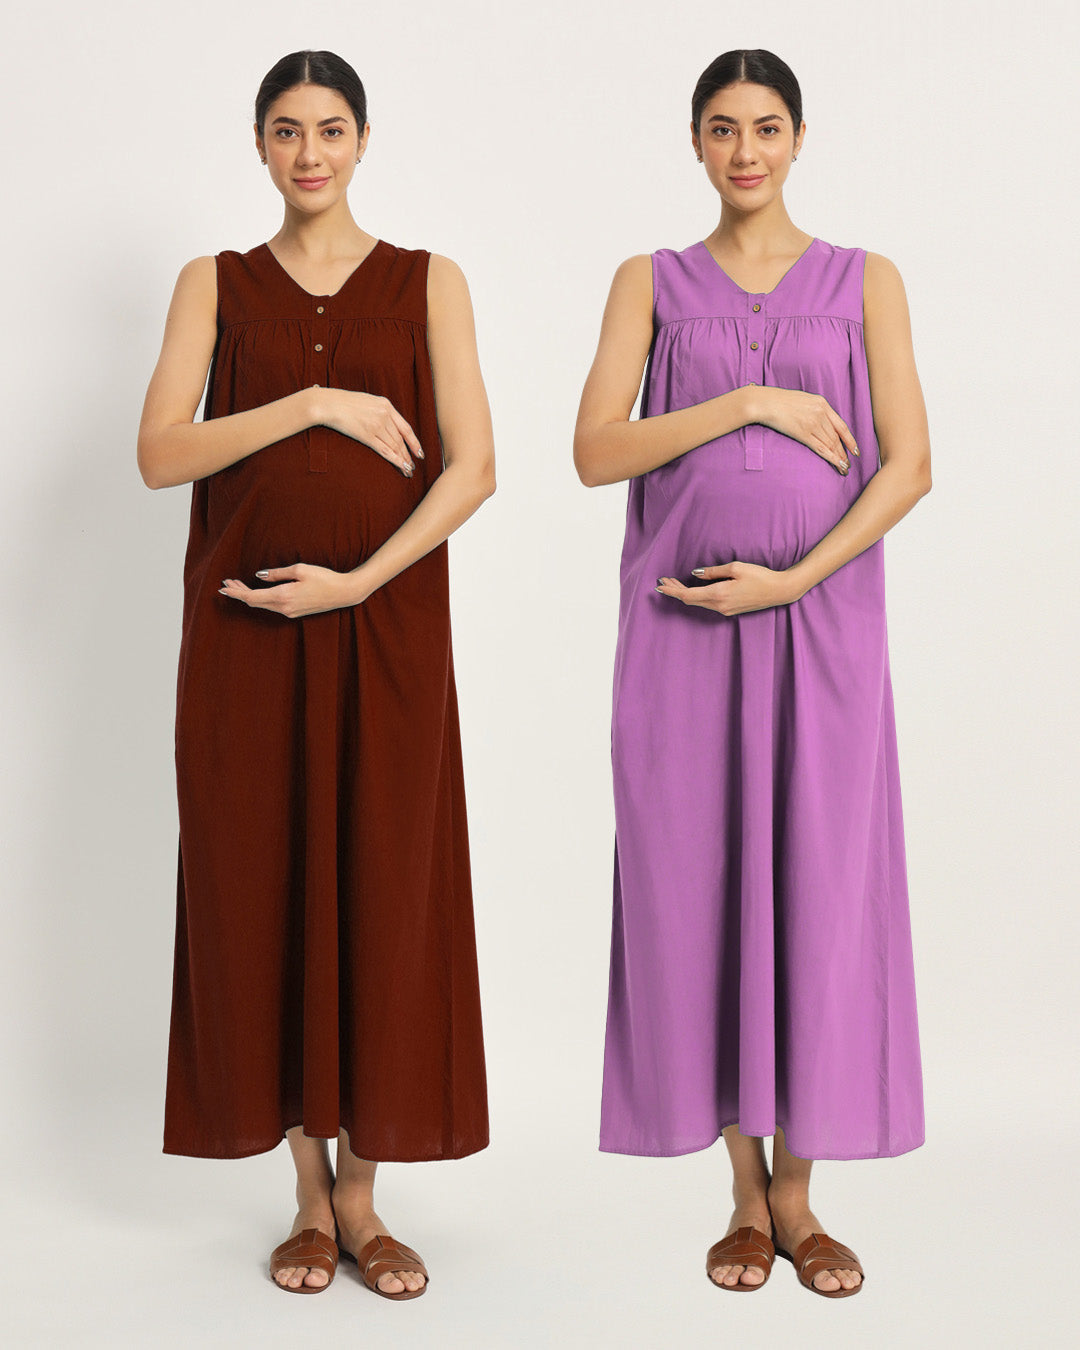 Combo: Russet Red & Wisteria Purple Mommylicious Maternity & Nursing Dress